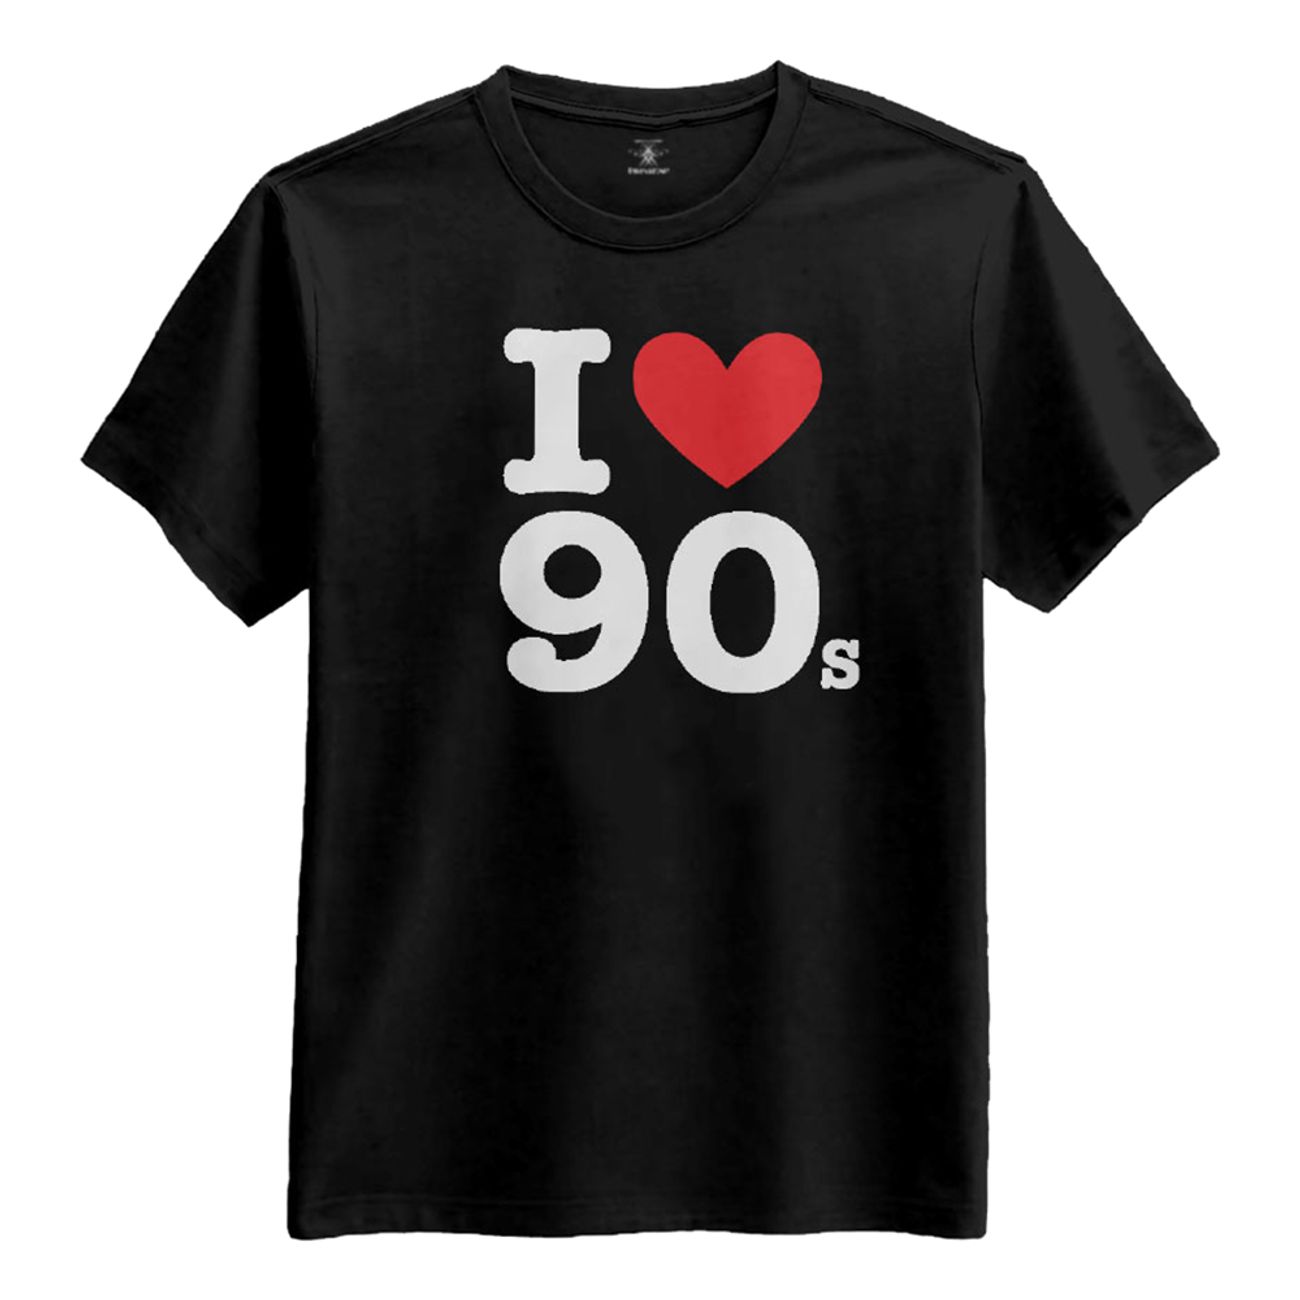 i-love-the-90s-t-shirt2-1